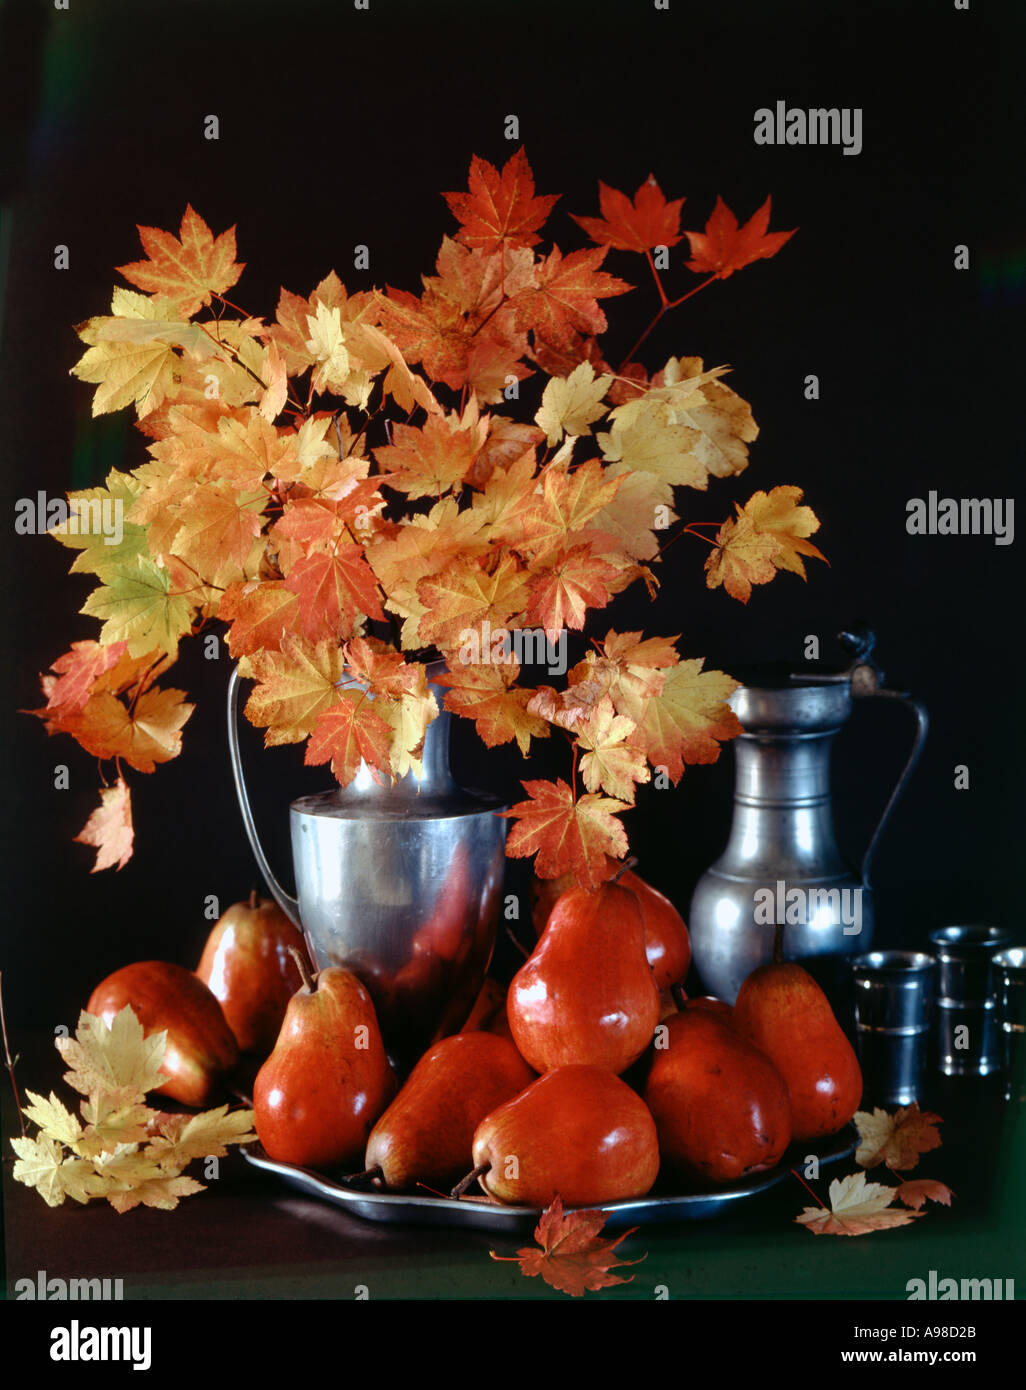 Harvest still life showing vine maple branches red Bartlett pears and Pewter pieces against a dark background Stock Photo